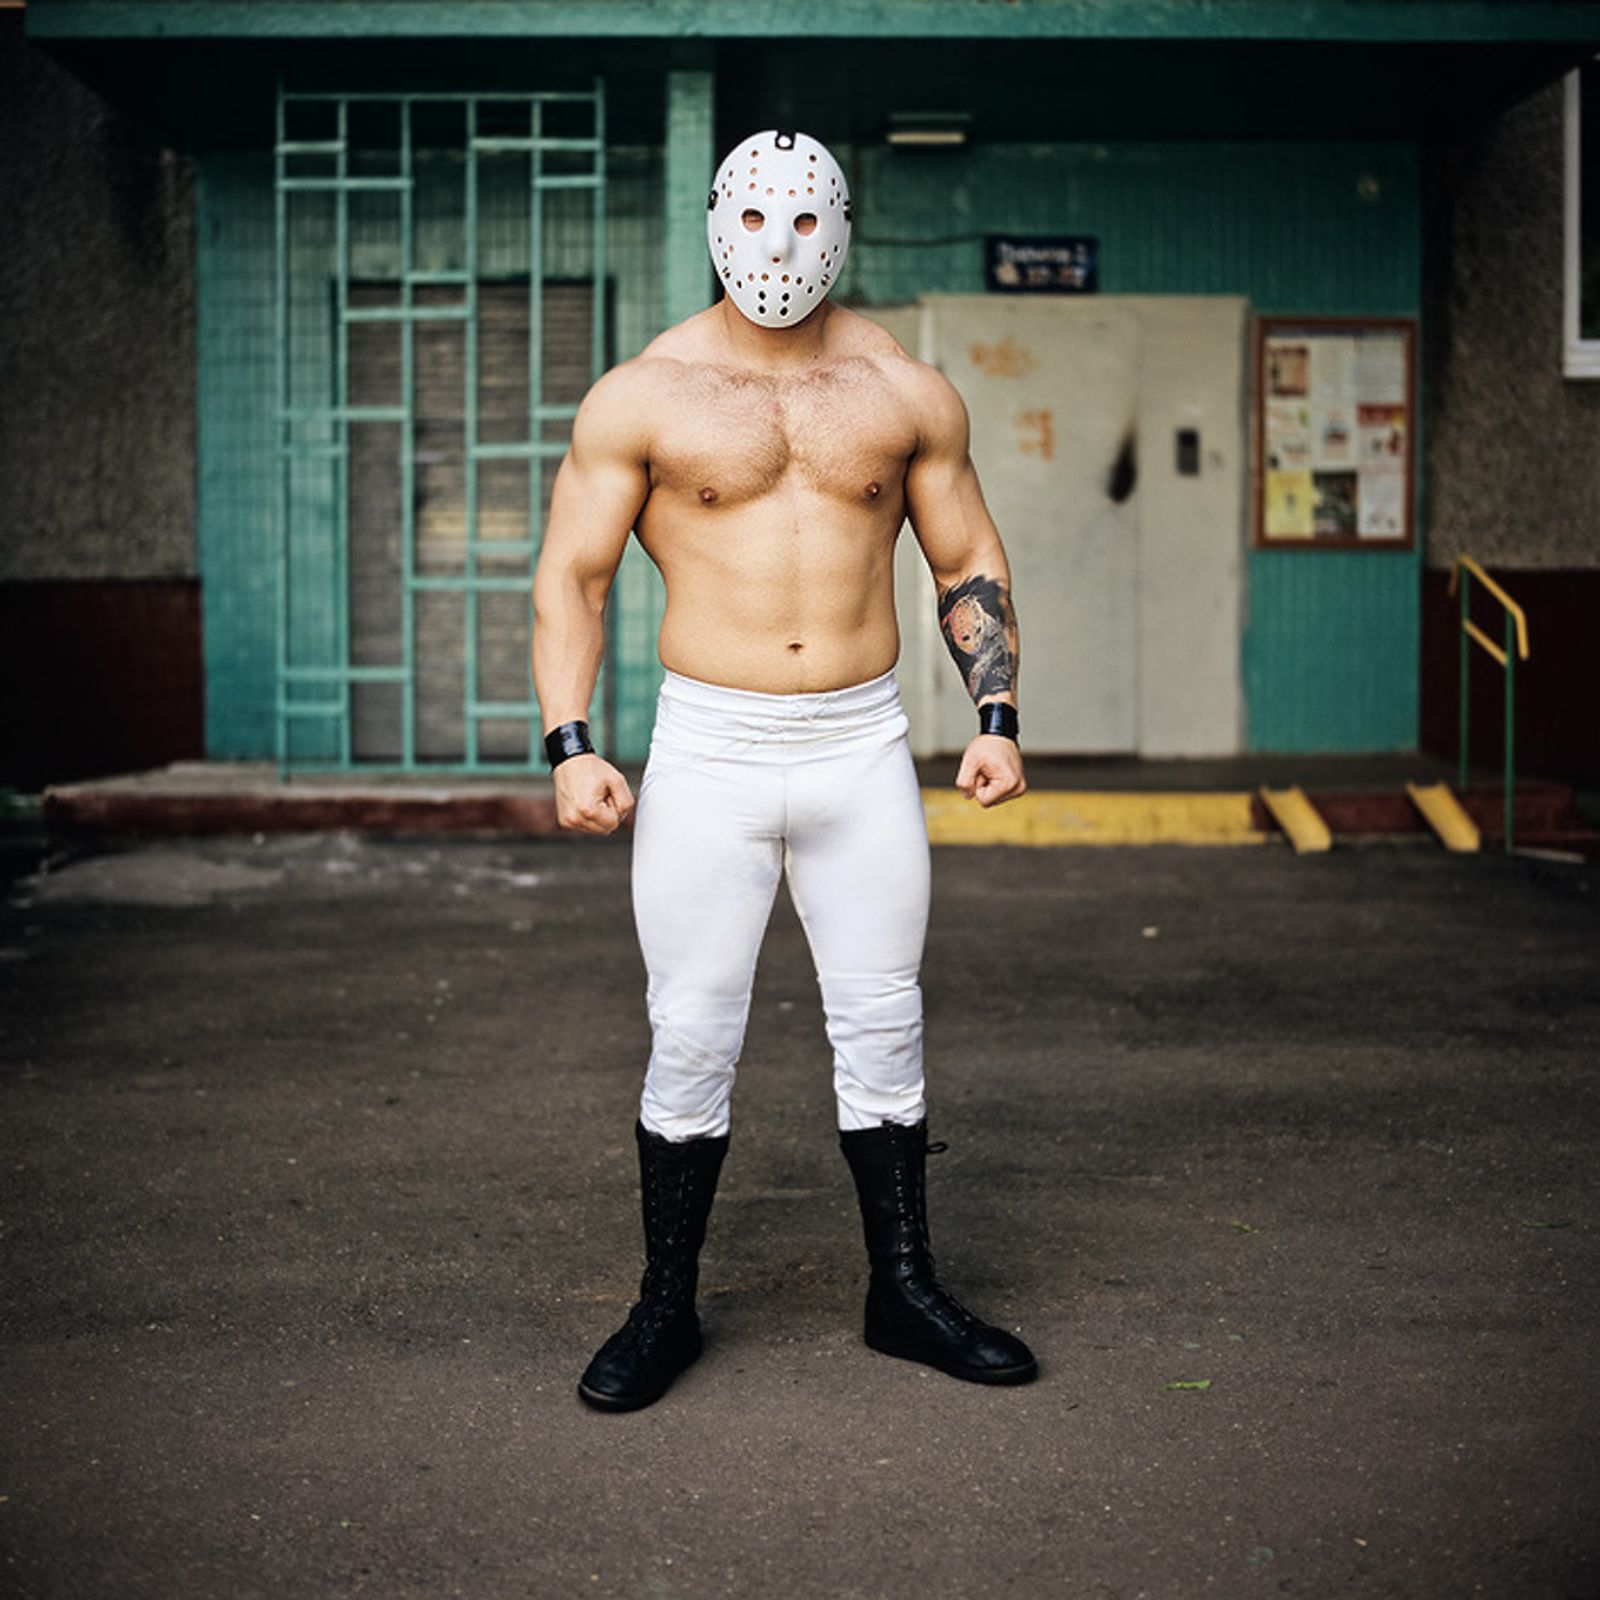 © Dmitry Lookianov - Image from the The Russian wrestlers photography project